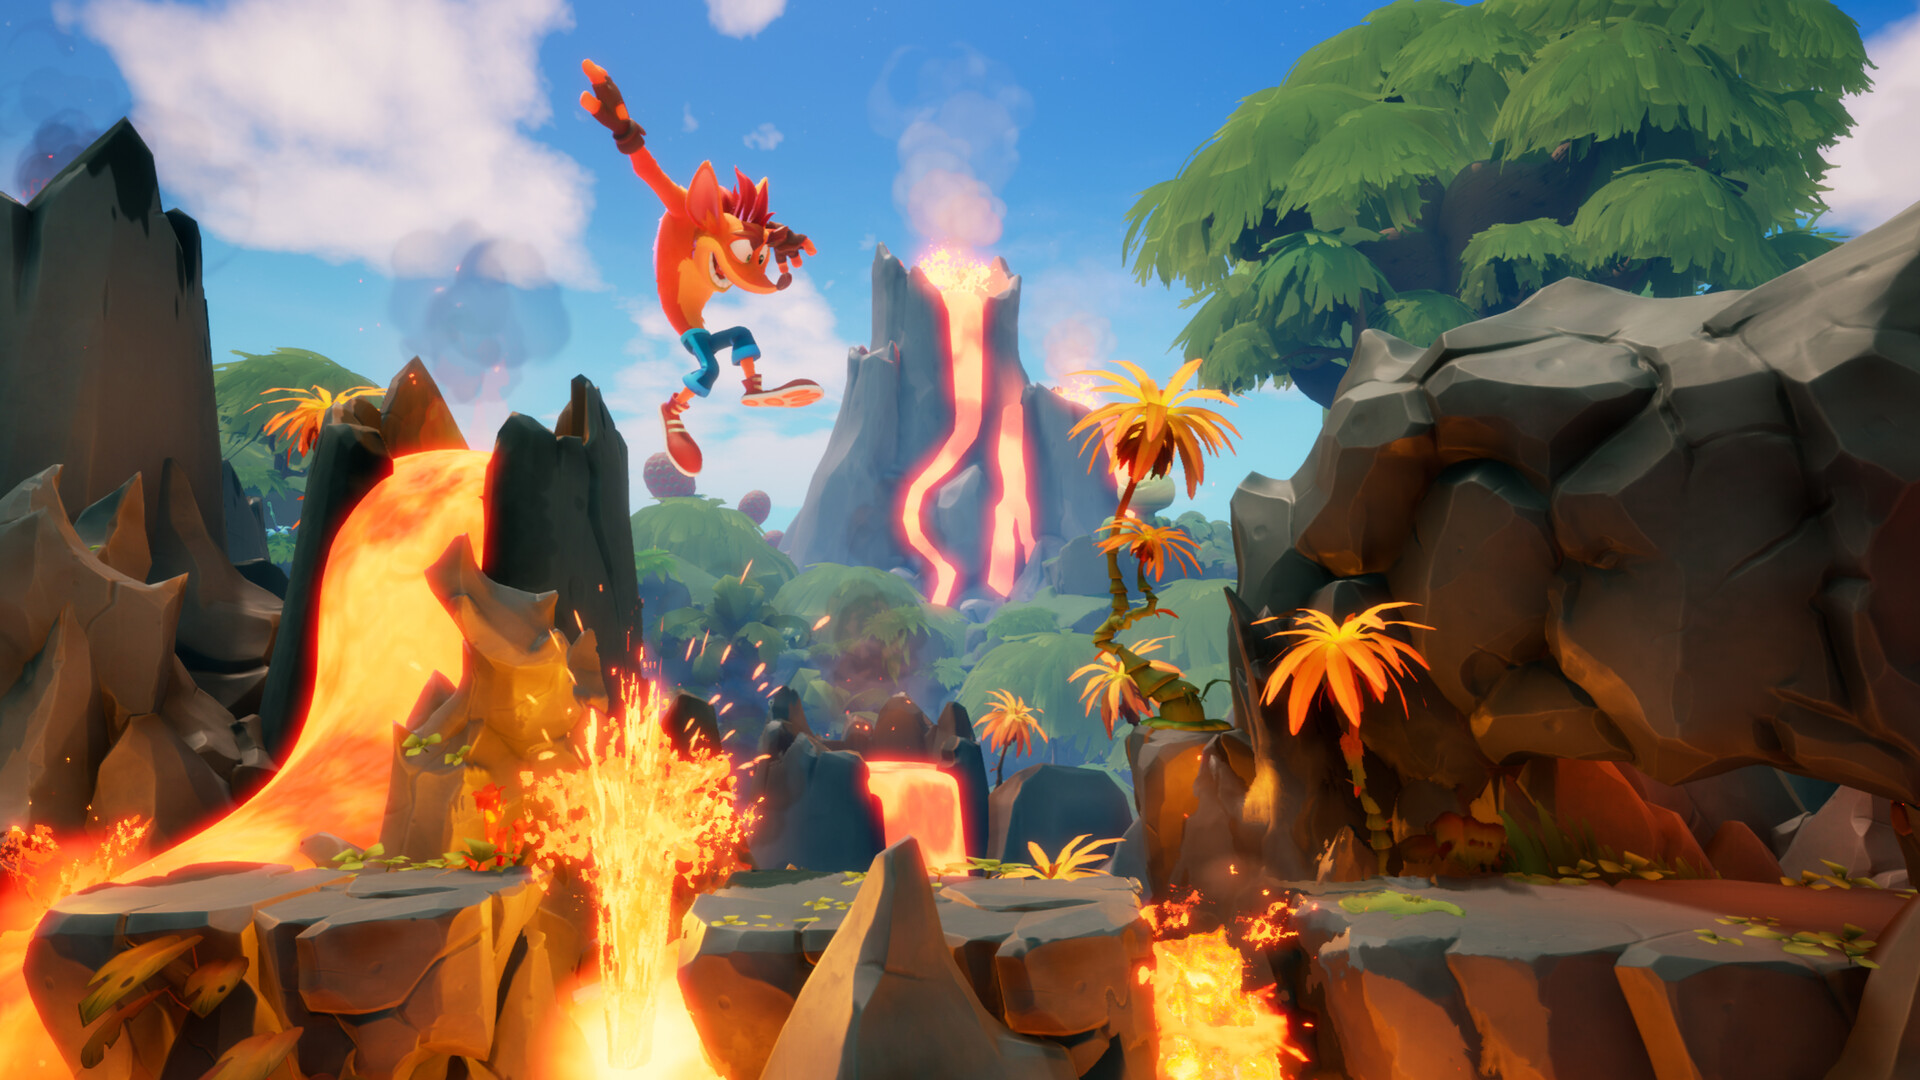 Crash Bandicoot™ 4: It's About Time — Available Now on PlayStation 5, Xbox  Series X